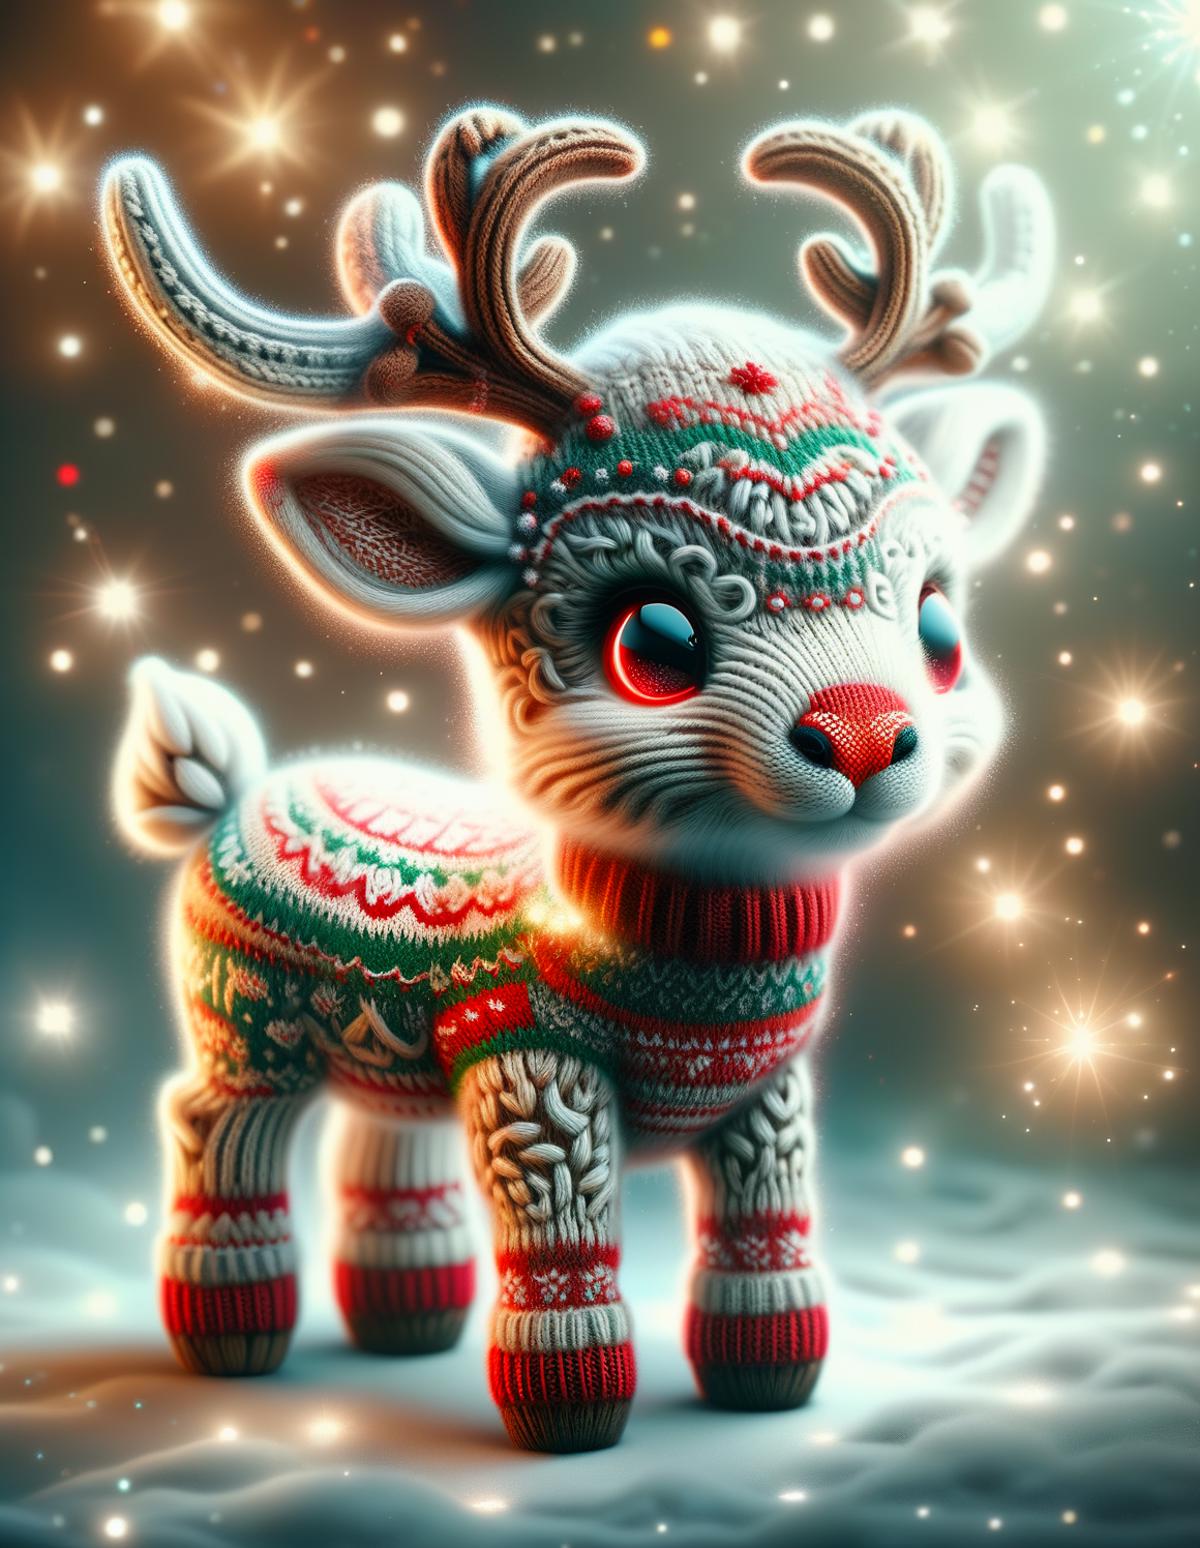 A 3D animated reindeer with red and white antlers, standing on a snowy surface.